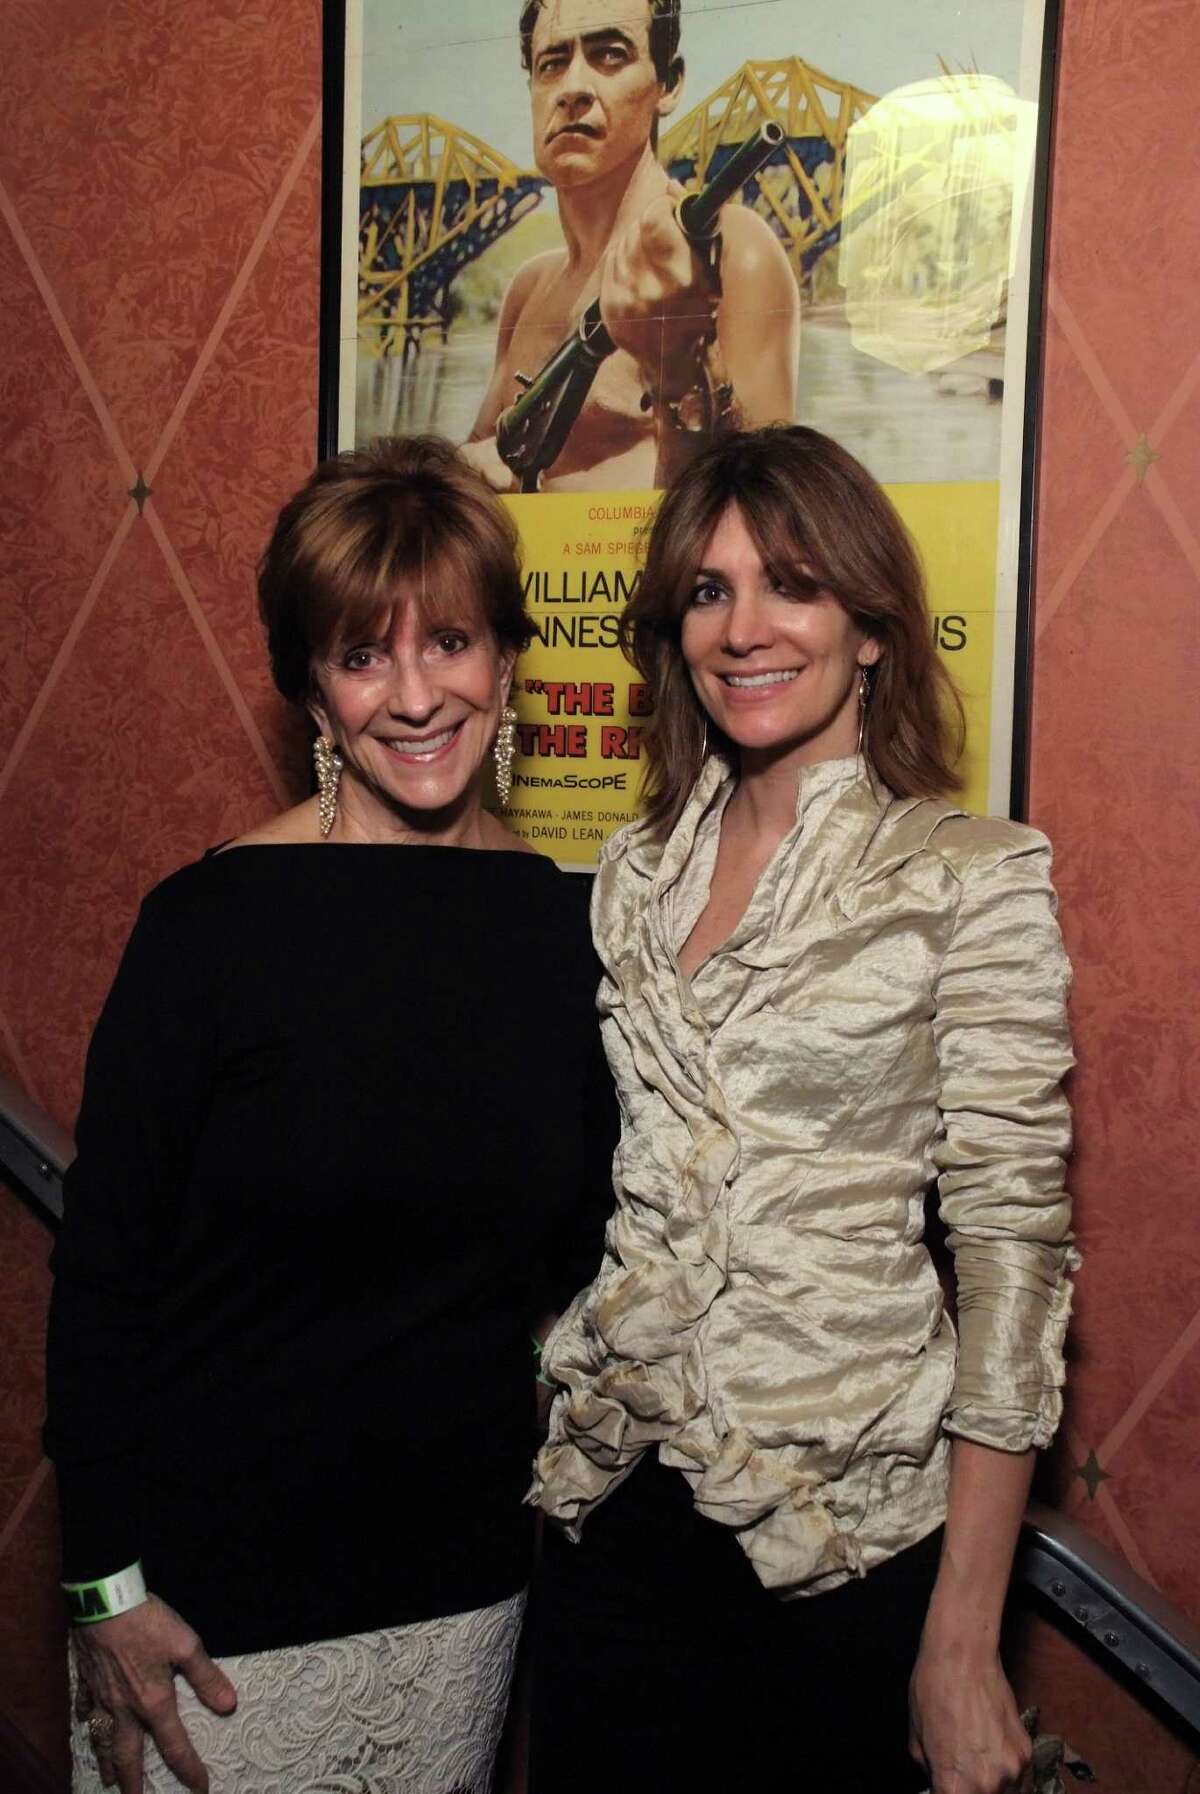 Lynne Andress, left, and Tiffany Masterson at the film premiere of "Crescendo" benefiting LifeHouse, 2 June 2013. Credit: David Postma/Genesis